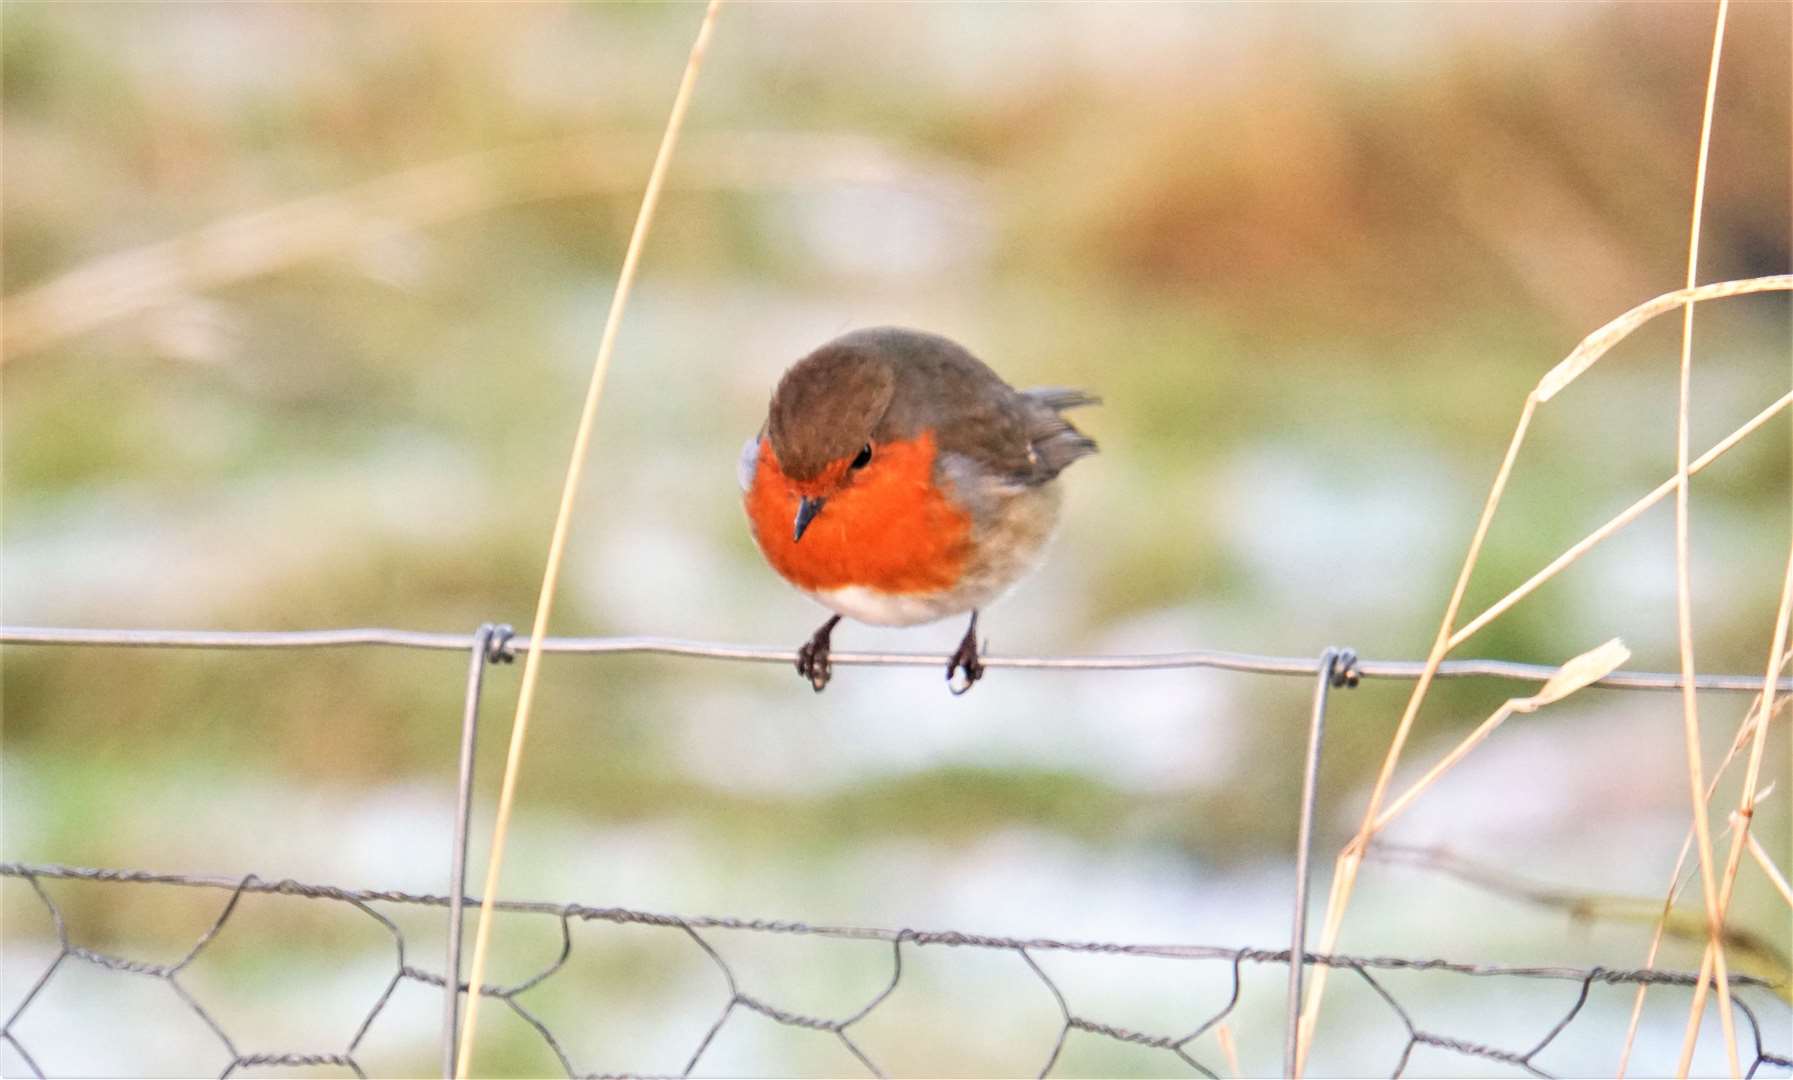 The little bird looks for titbits and was seen feeding from people's hands at Wick riverside. Picture: DGS